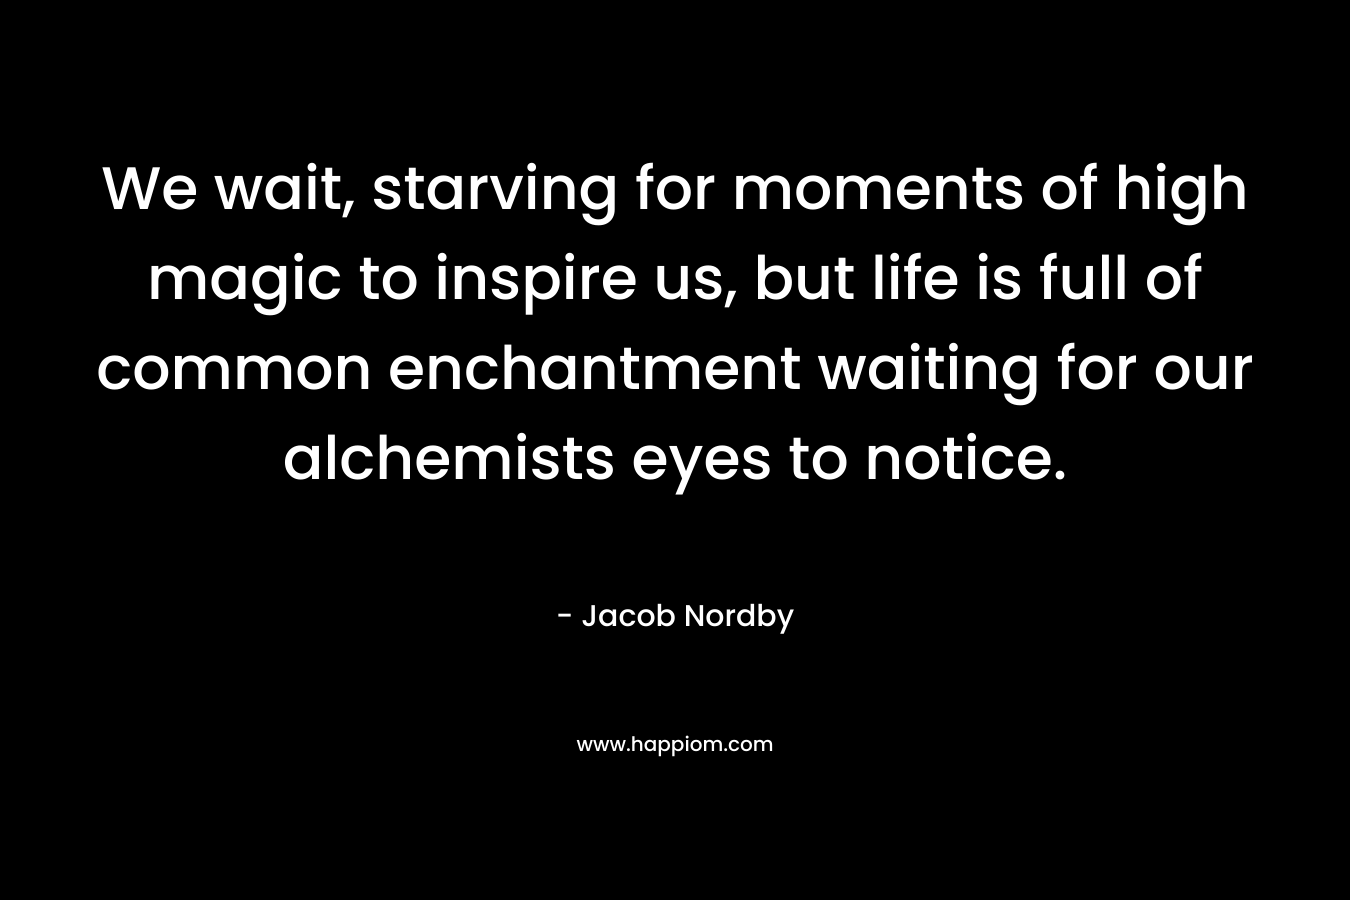 We wait, starving for moments of high magic to inspire us, but life is full of common enchantment waiting for our alchemists eyes to notice.